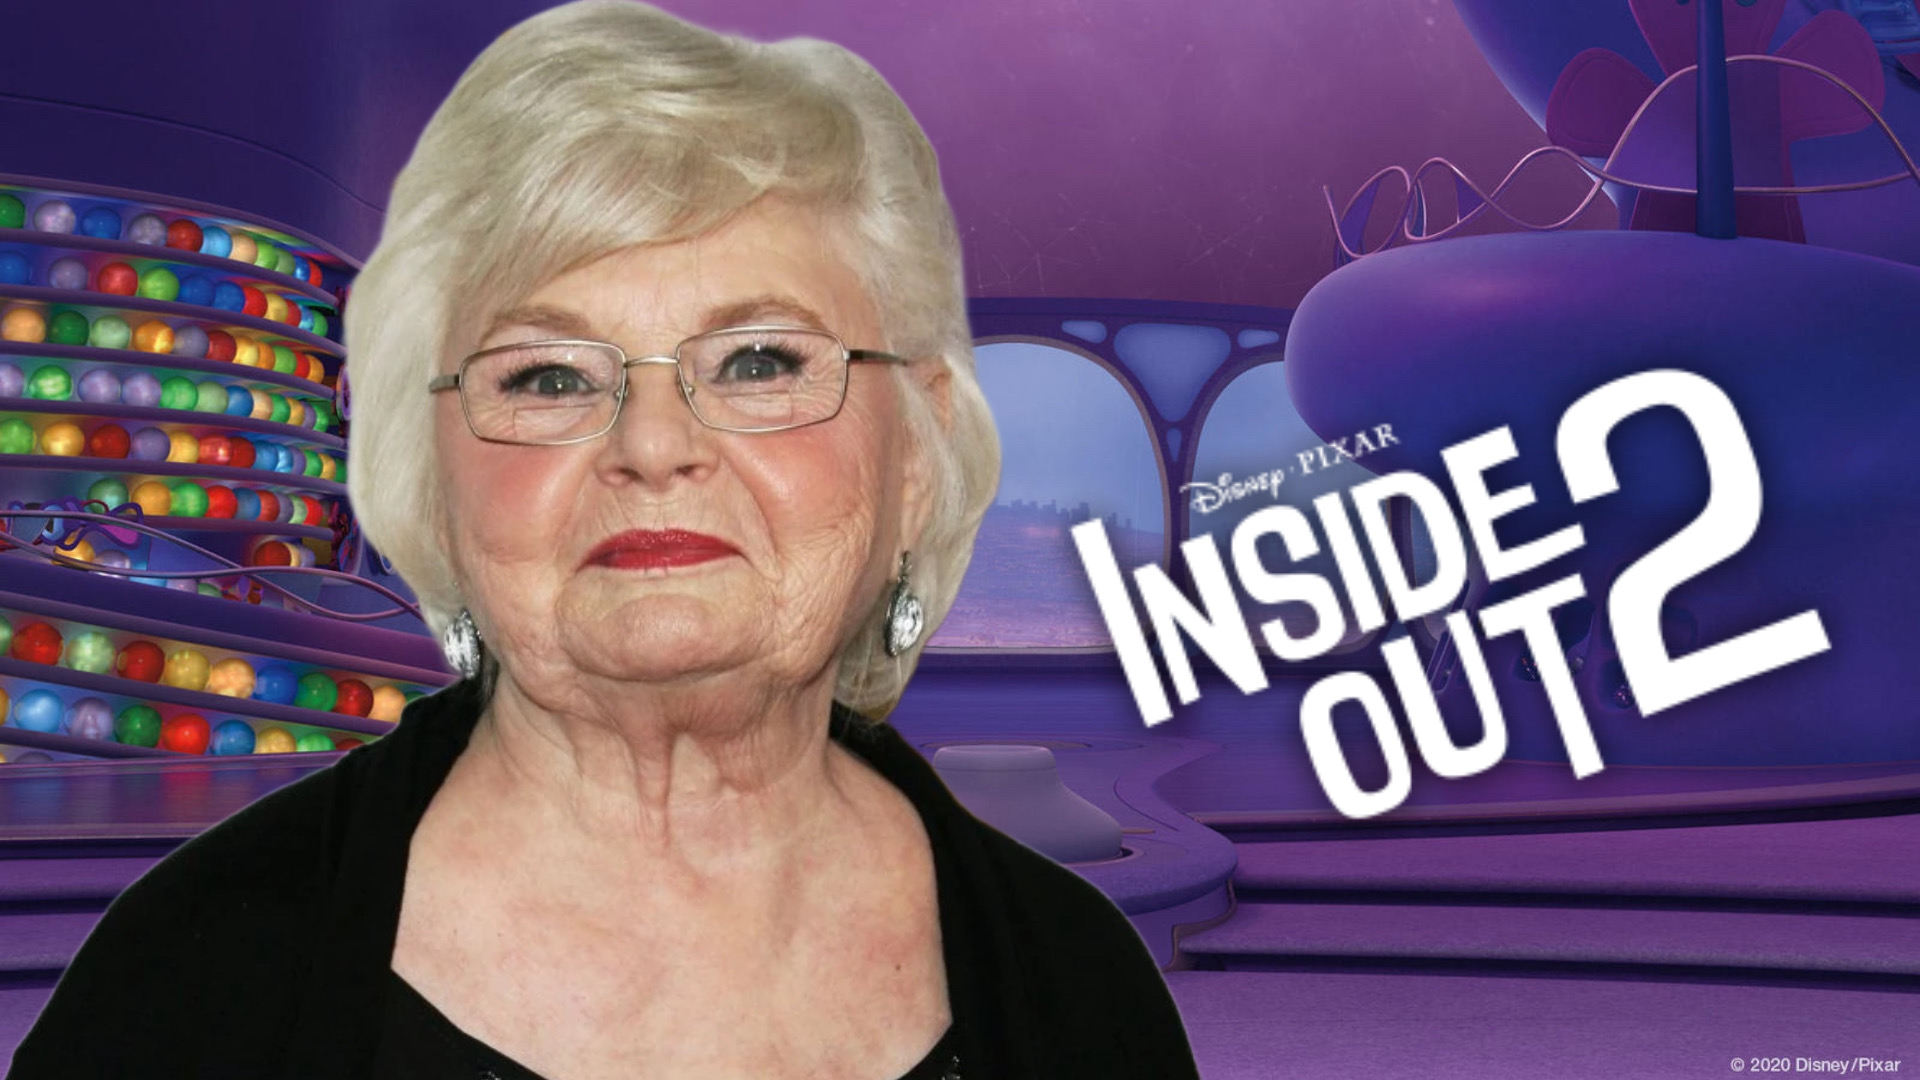 June Squibb Joins Pixar’s ‘Inside Out 2’